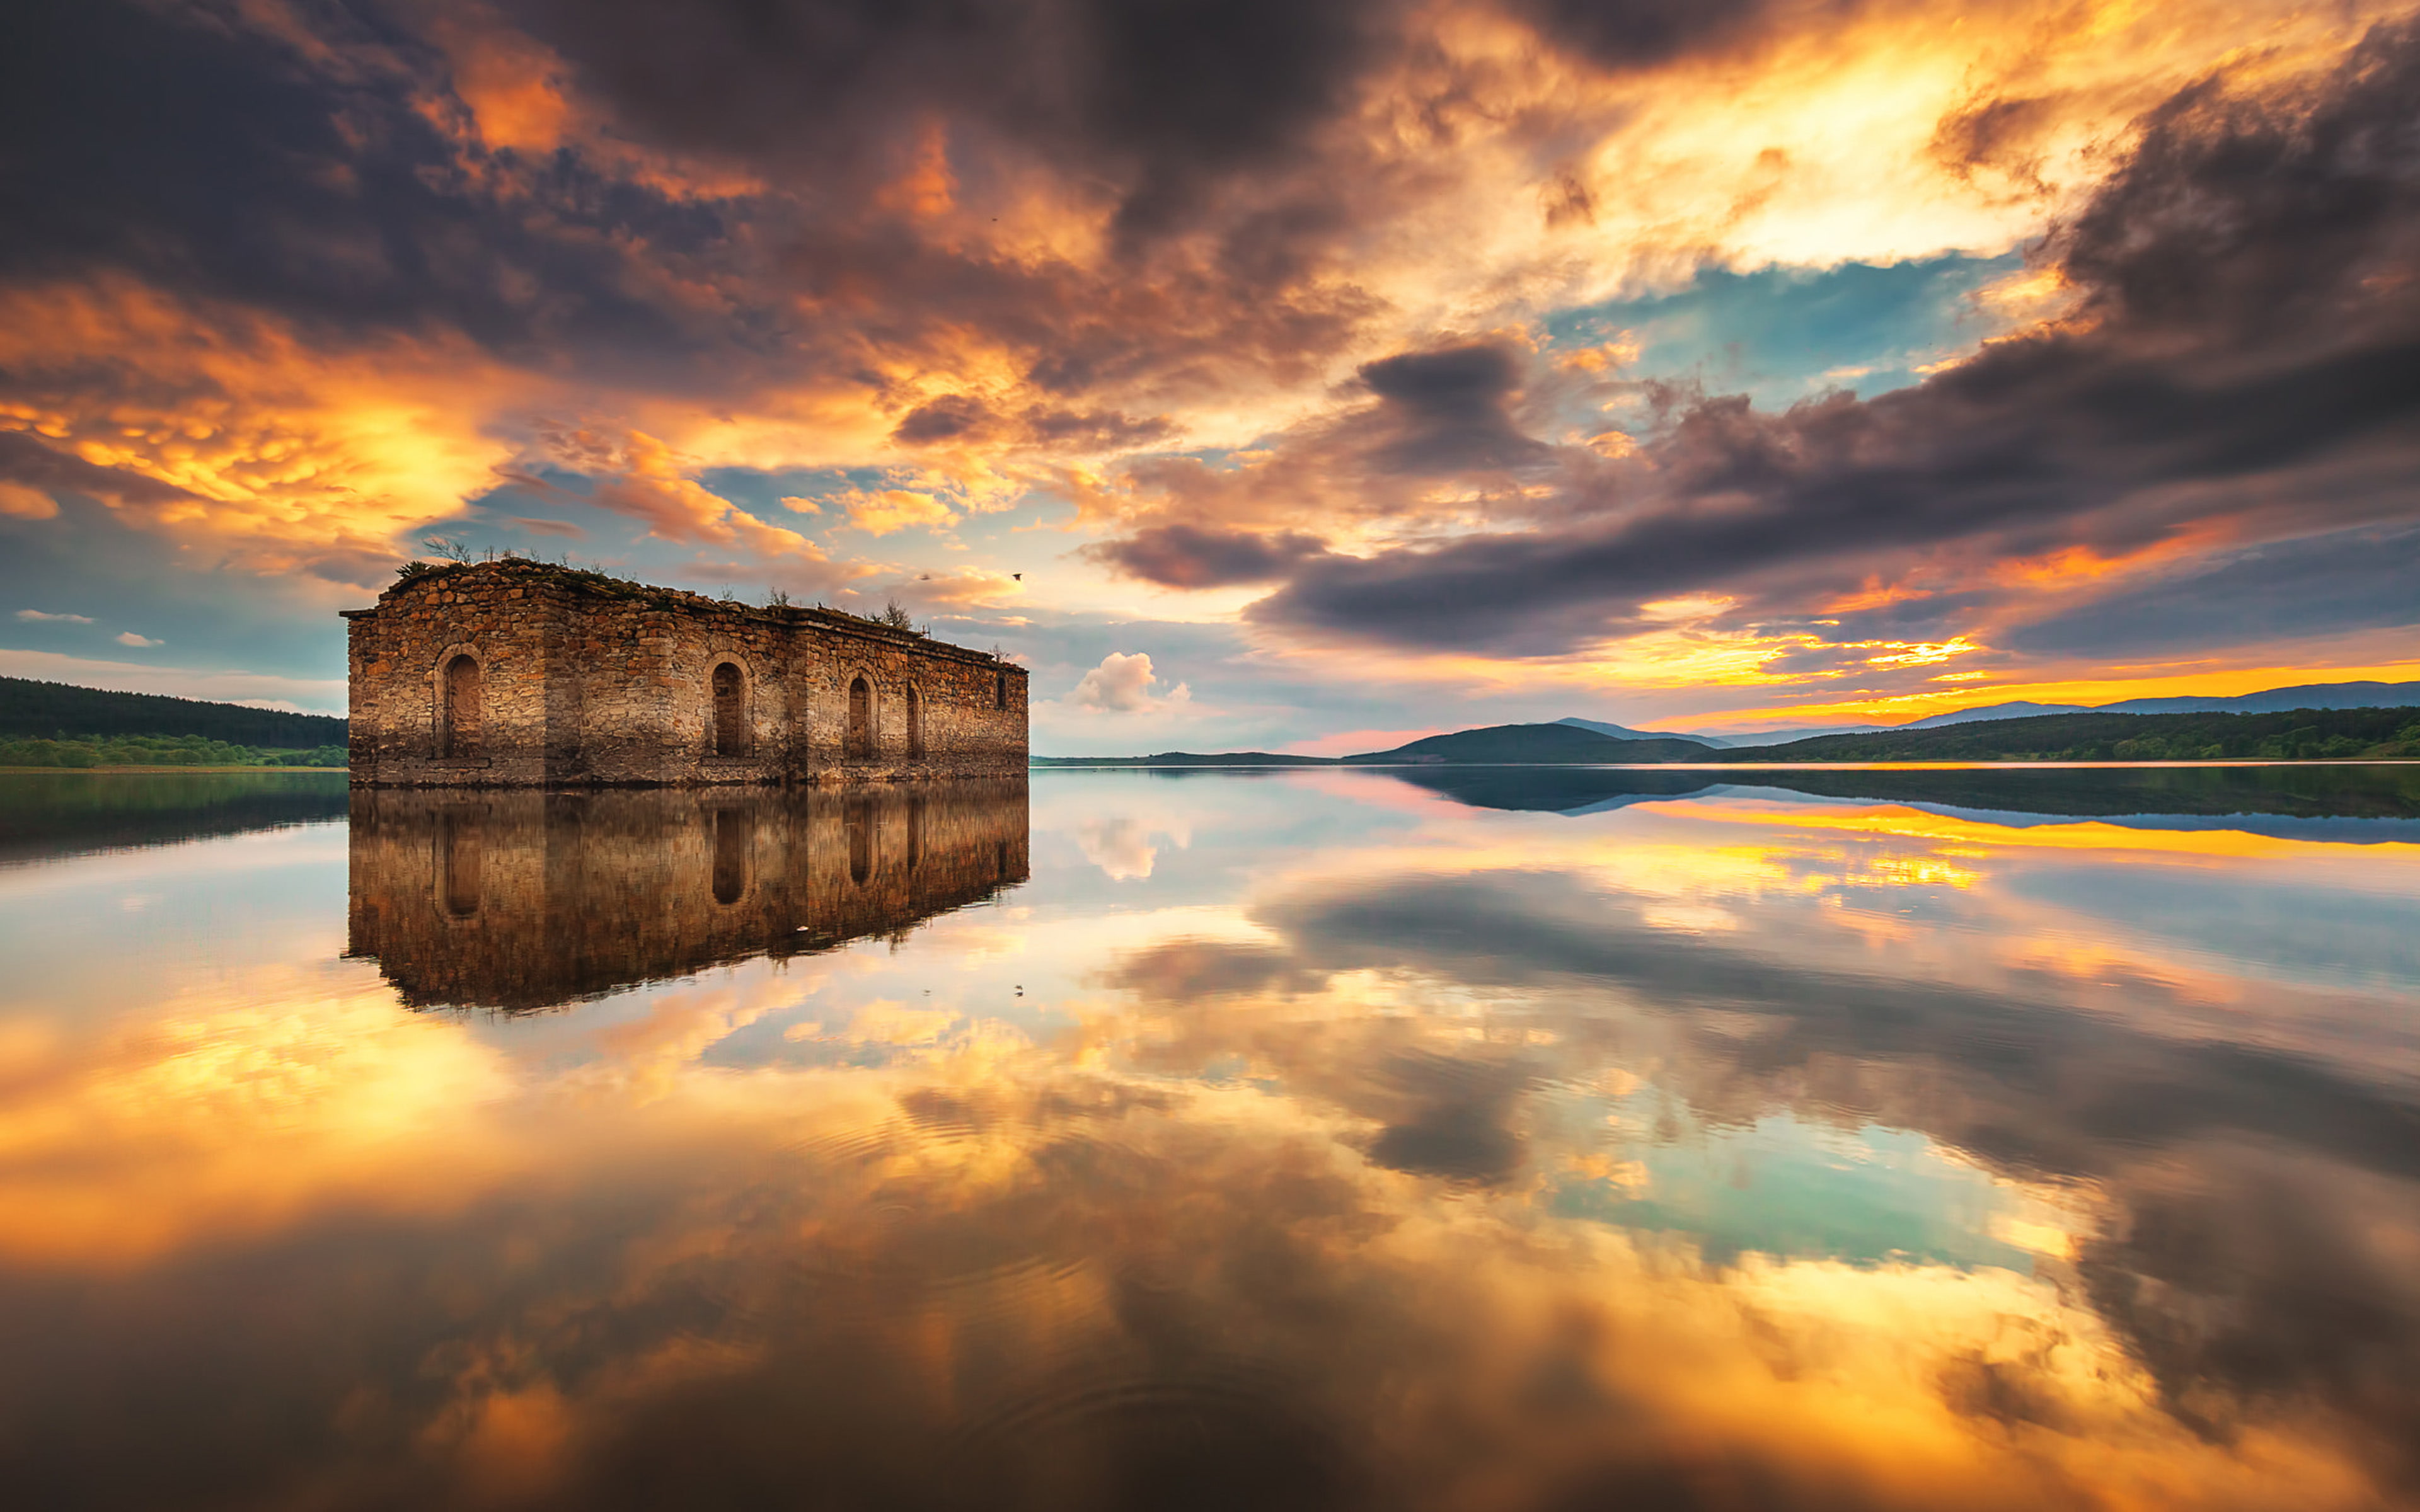 Dam Jebrechevo In Bulgaria Sunset Sky Red Clouds Abandoned Church Reflection In Water Hd Desktop Wallpapers For Computers Laptop Tablet And Mobile Phones